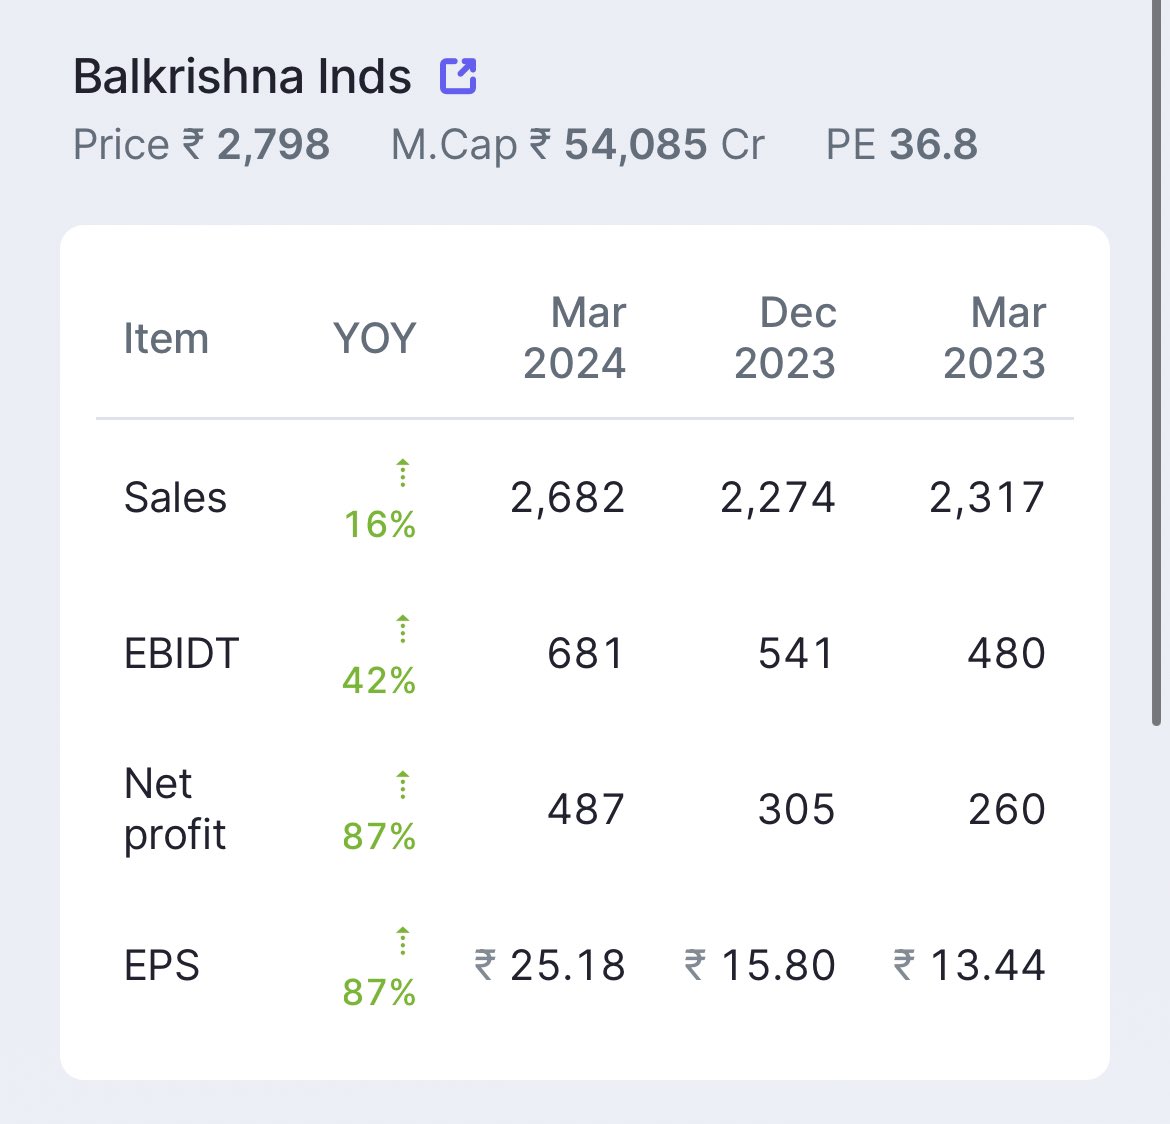 AFTER A STRONG Q4FY24 RESULT BY BALKRISHNA INDUSTRIES 🔥 SEVERAL BROKERAGE HOUSES HAVE GIVEN THEIR TARGETS ON THE STOCK 1) NOMURA TARGET - 3230 2) NUVAMA TARGET - 3070 3) IIFL SECURITIES - 3325 4) ICICI SECURITIES -2966 VS CMP 2798 BUT STOCK PRICES IS ALSO UP SIGNIFICANTLY